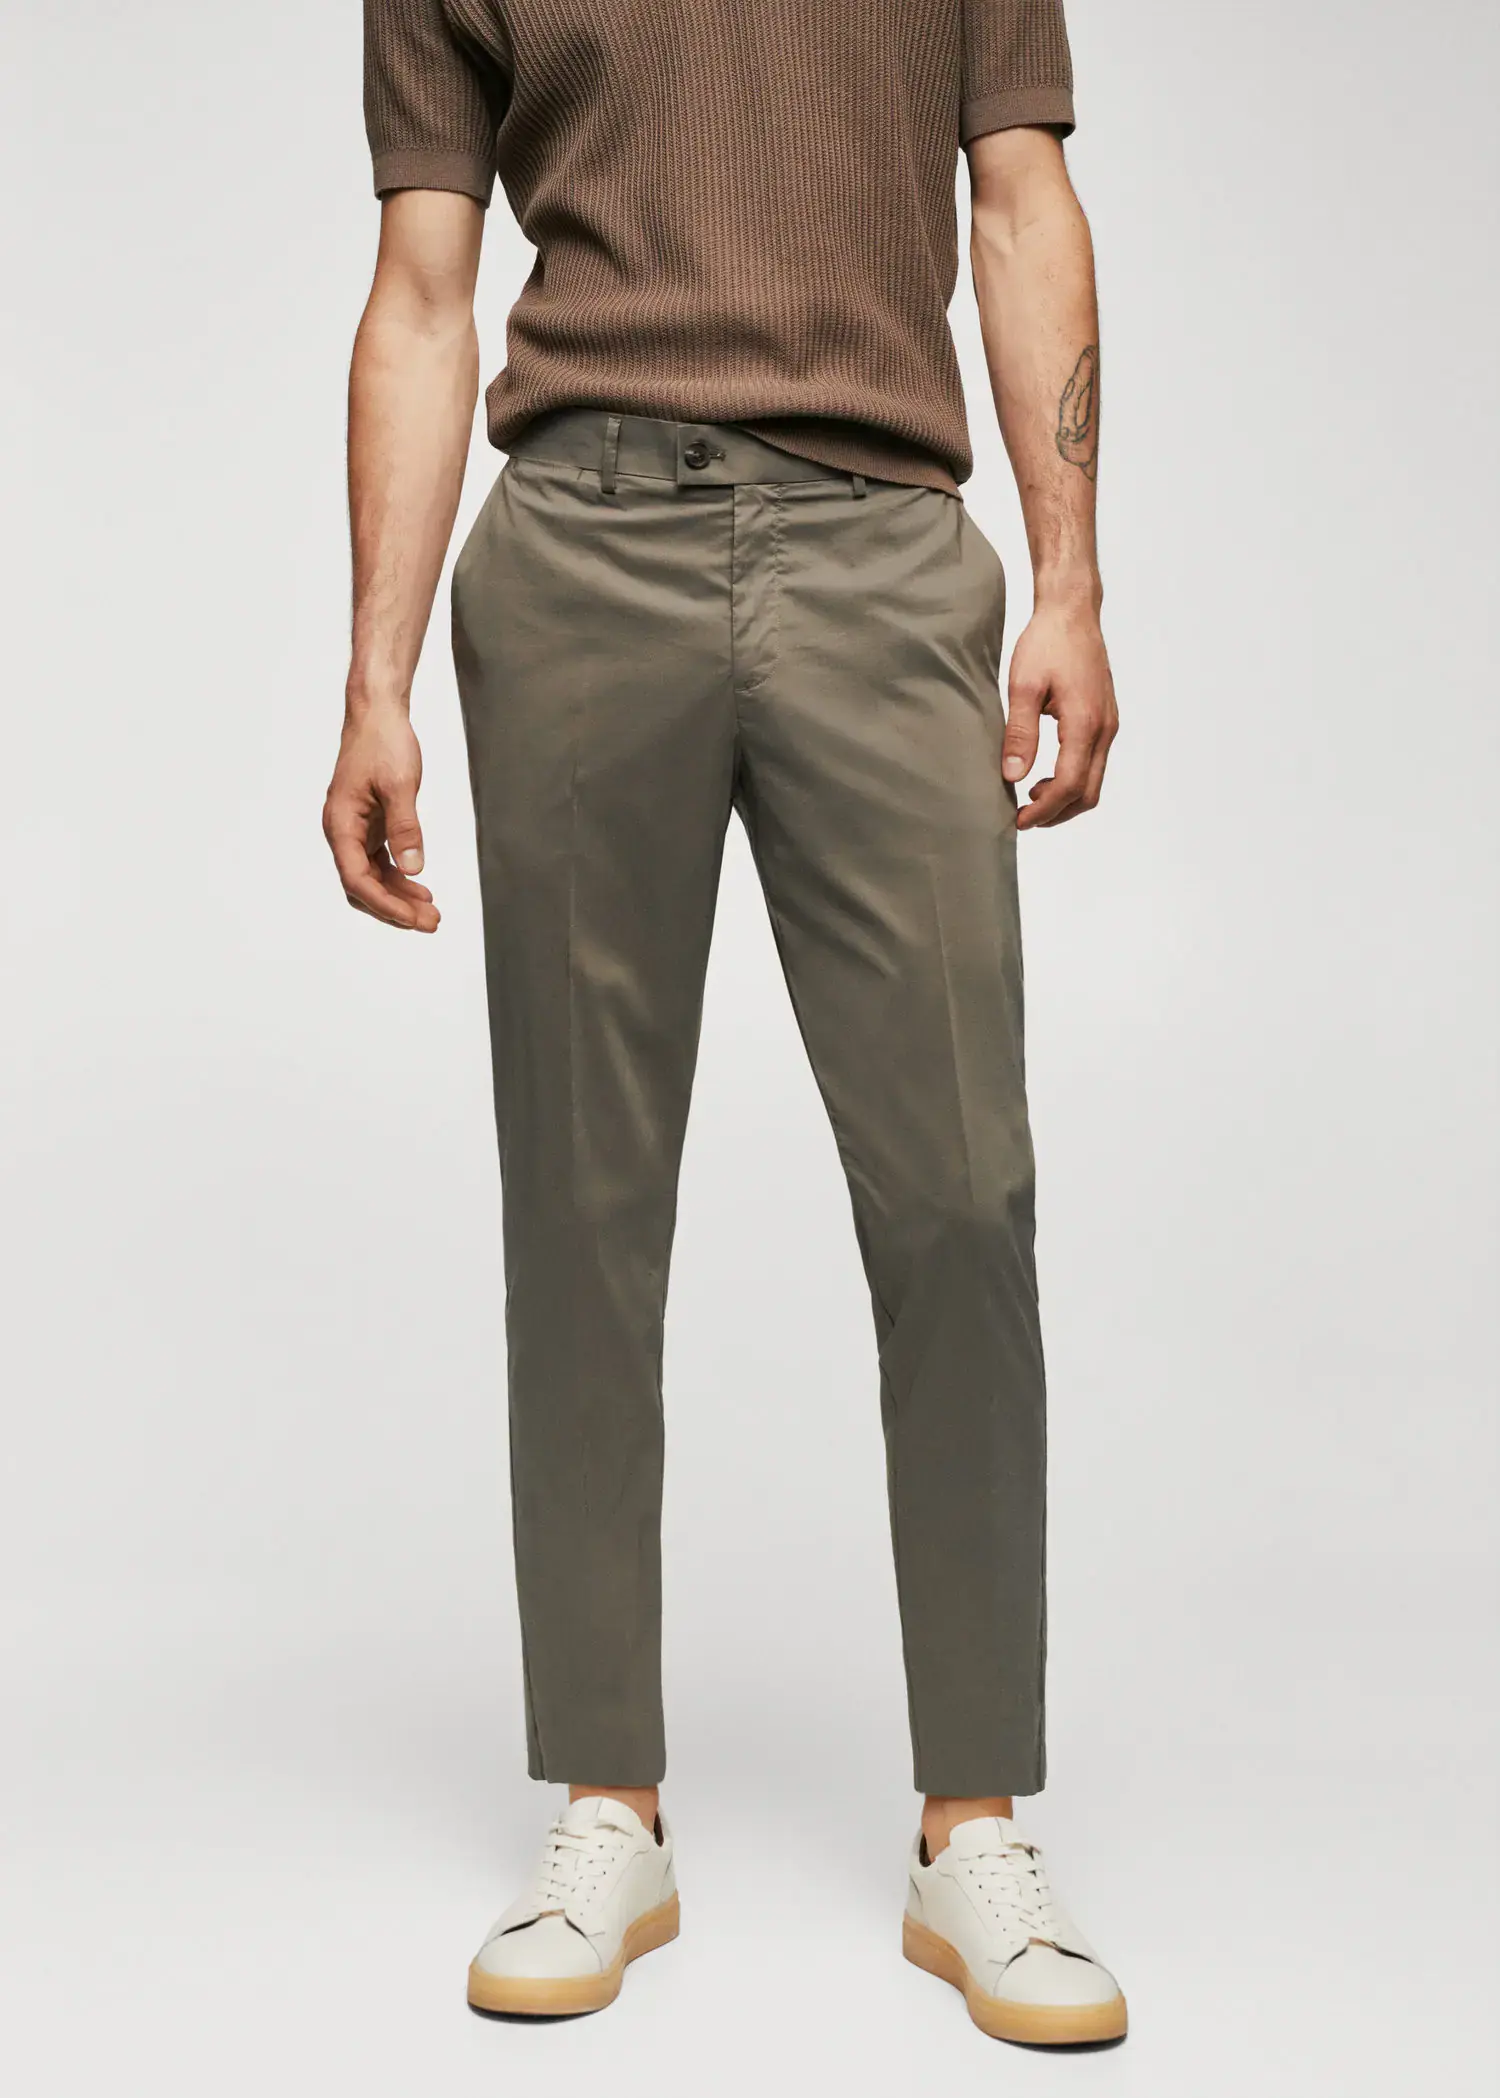 Mango Lightweight cotton trousers. a man wearing a pair of khaki colored pants. 